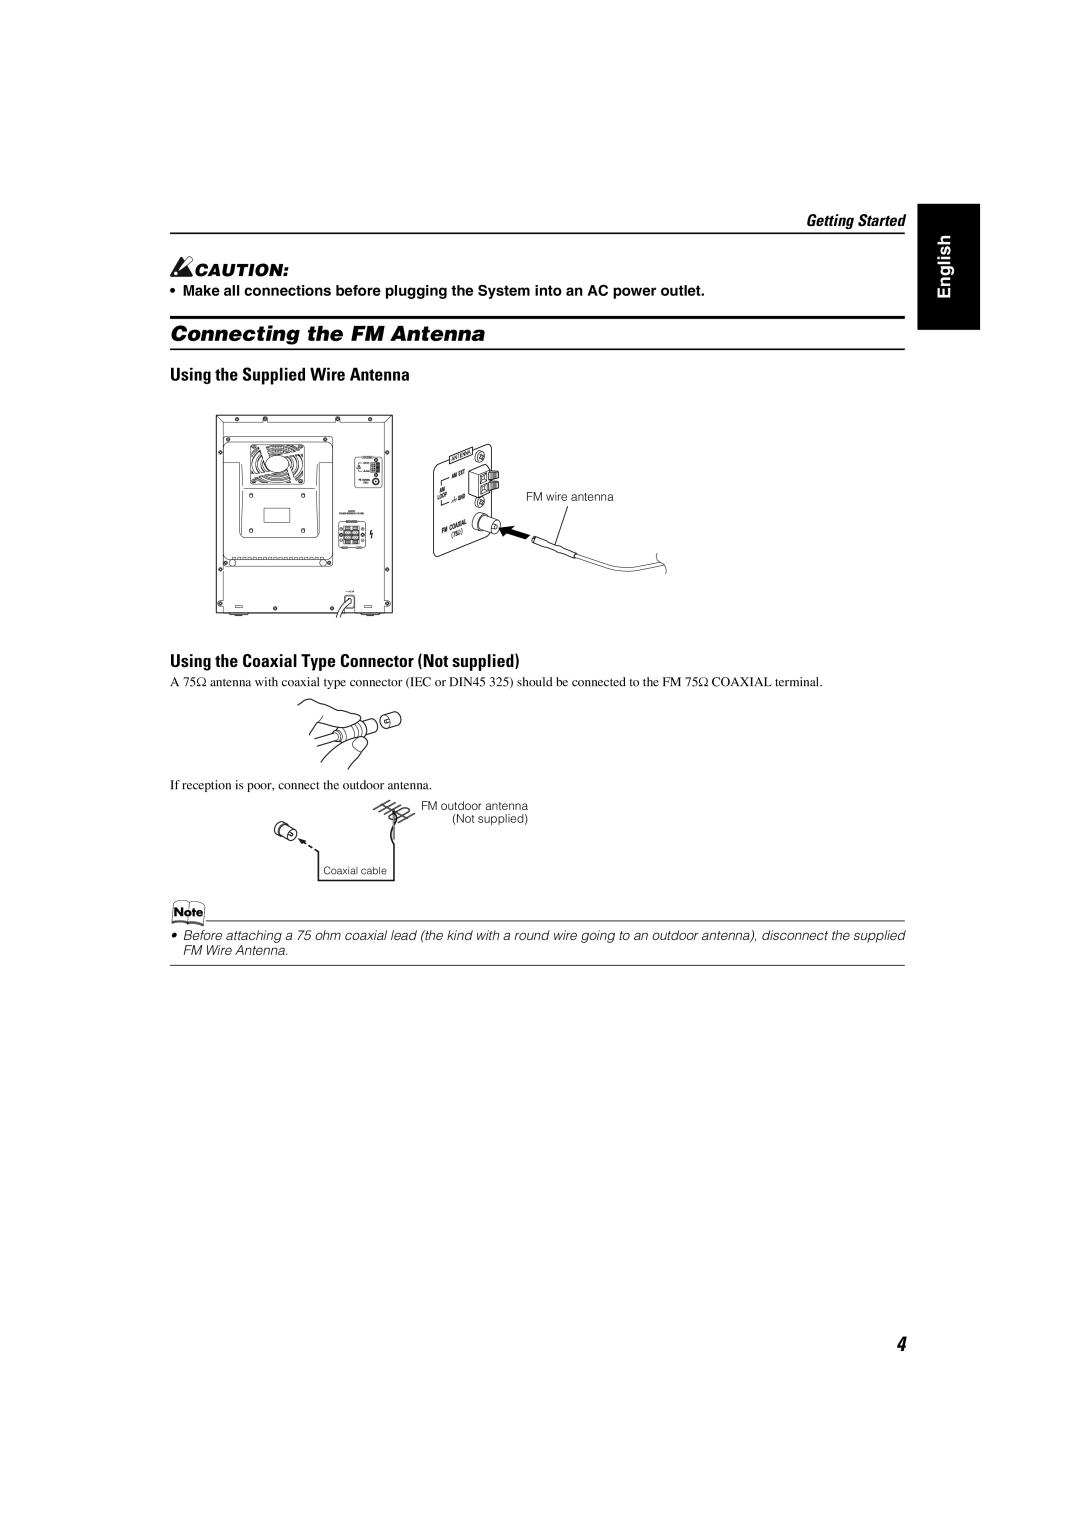 JVC MX-KC45 manual Connecting the FM Antenna, Using the Supplied Wire Antenna, English, Getting Started 